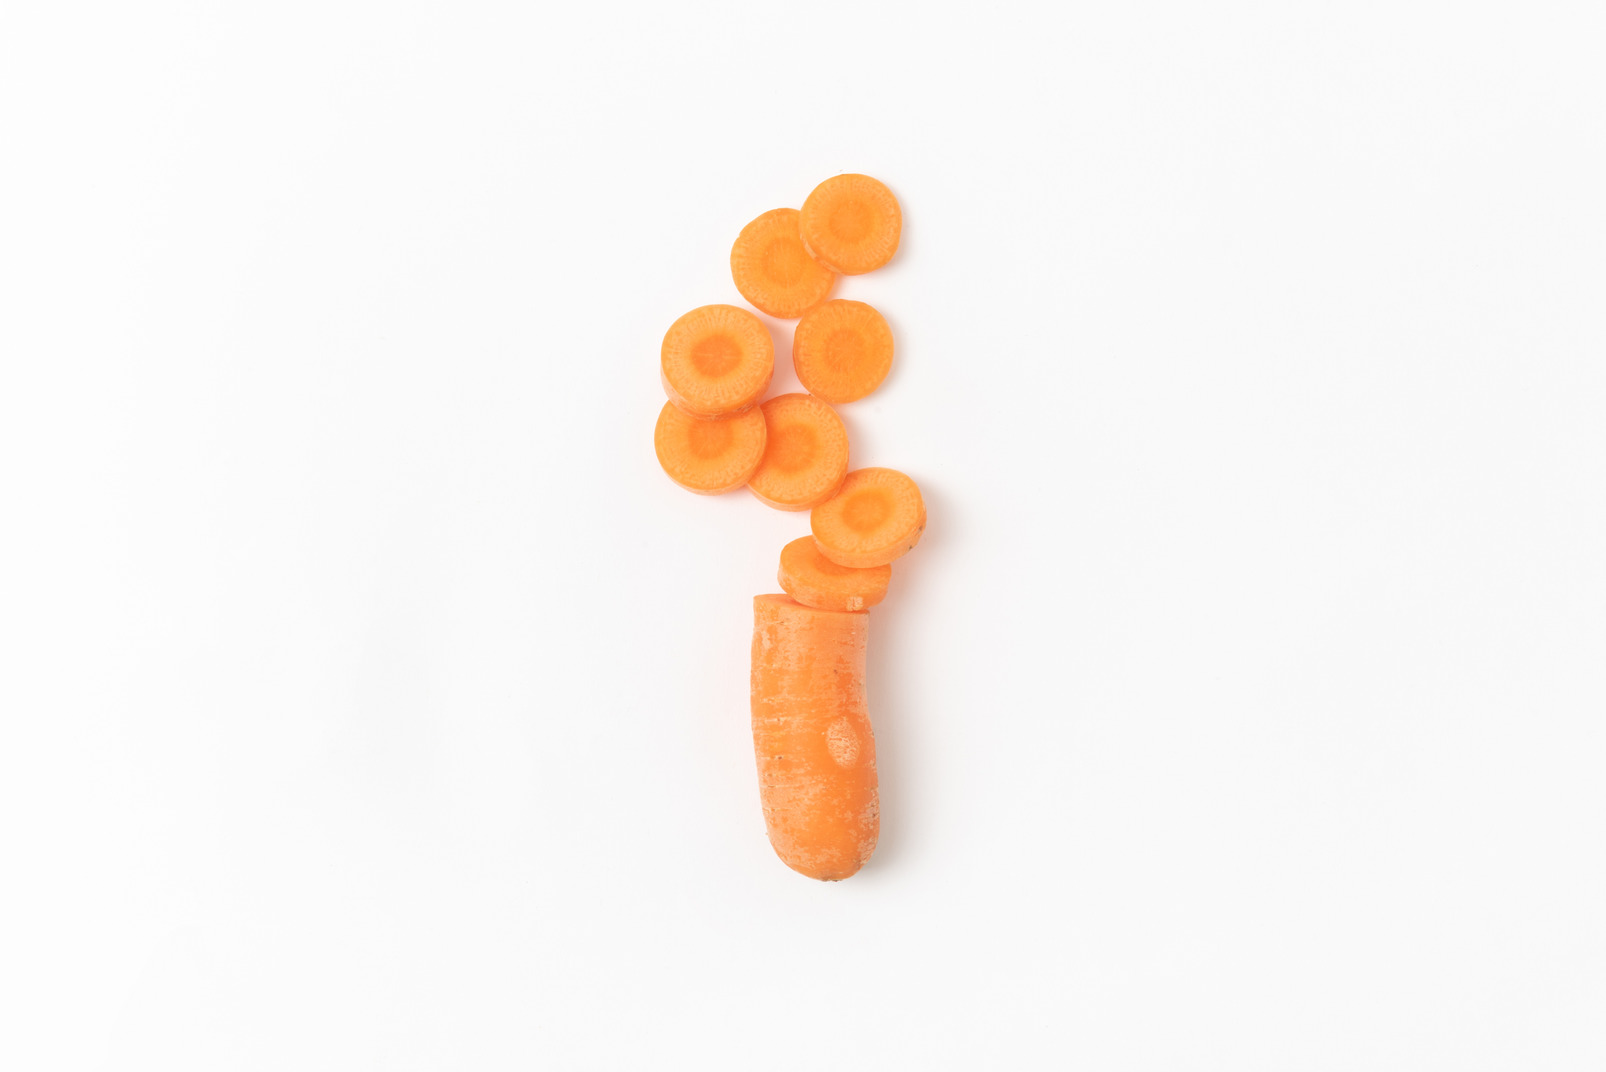 Cut carrot on white background